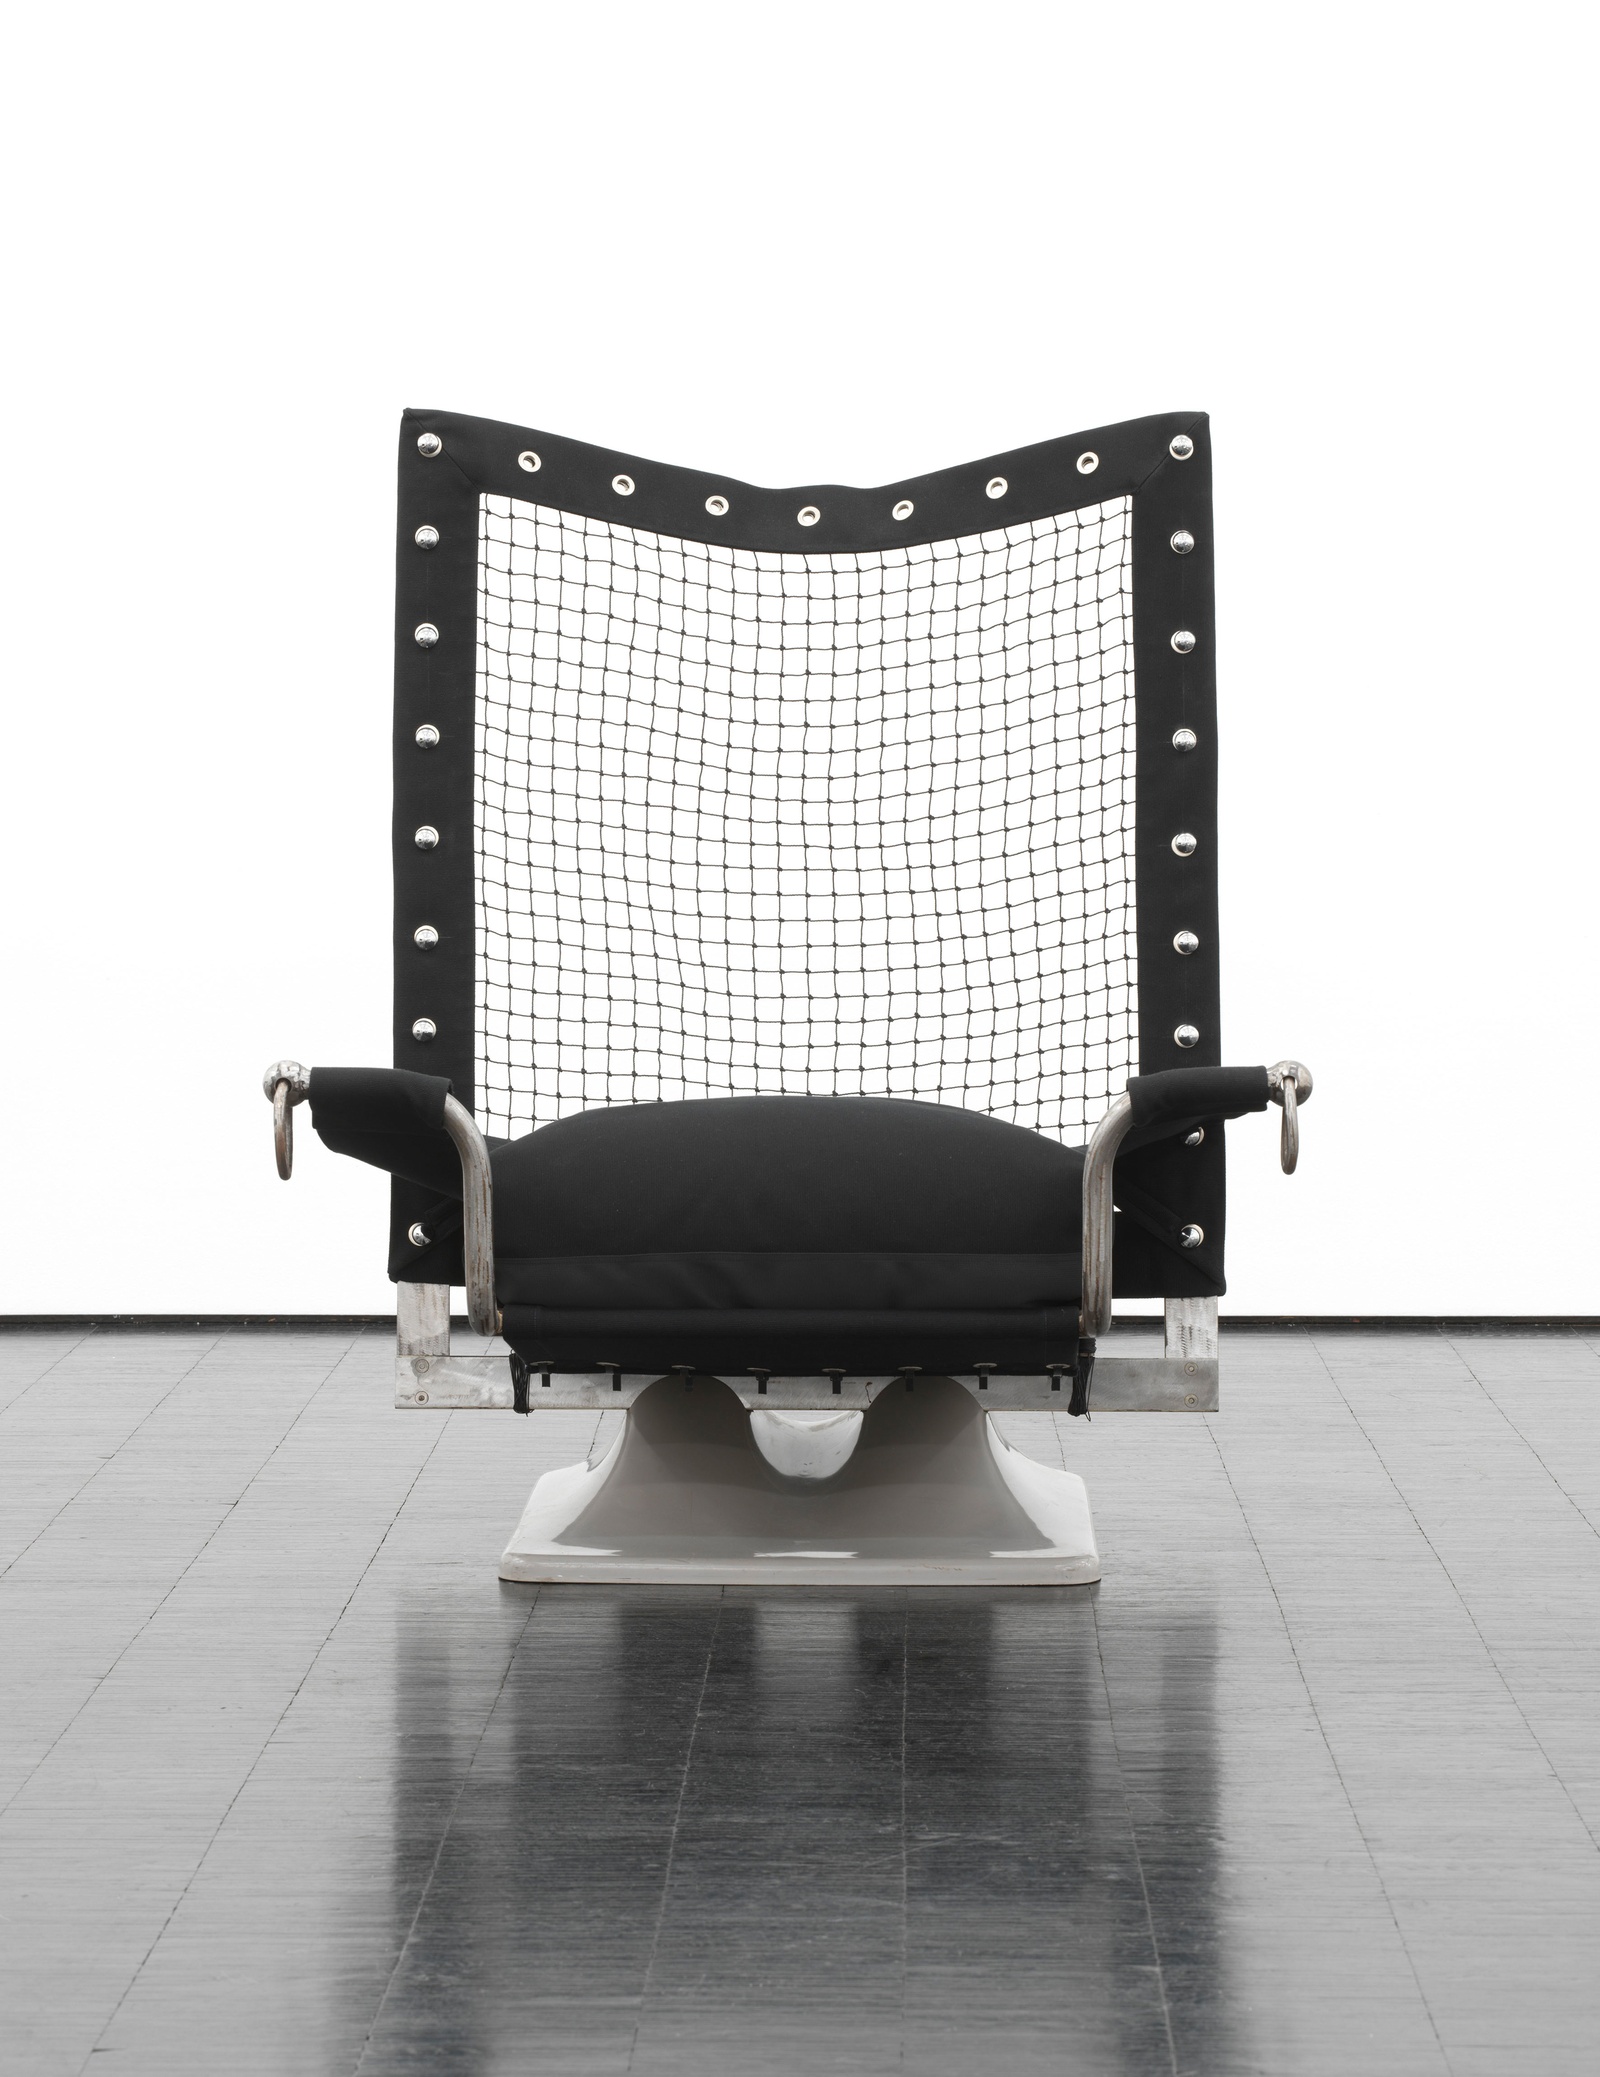 ConcordeAE(v)O Armchair, 2023plastic, iron, nickel, web, cotton and polypropylene110 x 80 x 80 cm | 43 1/3 x 31 1/2 x 31 1/2 in